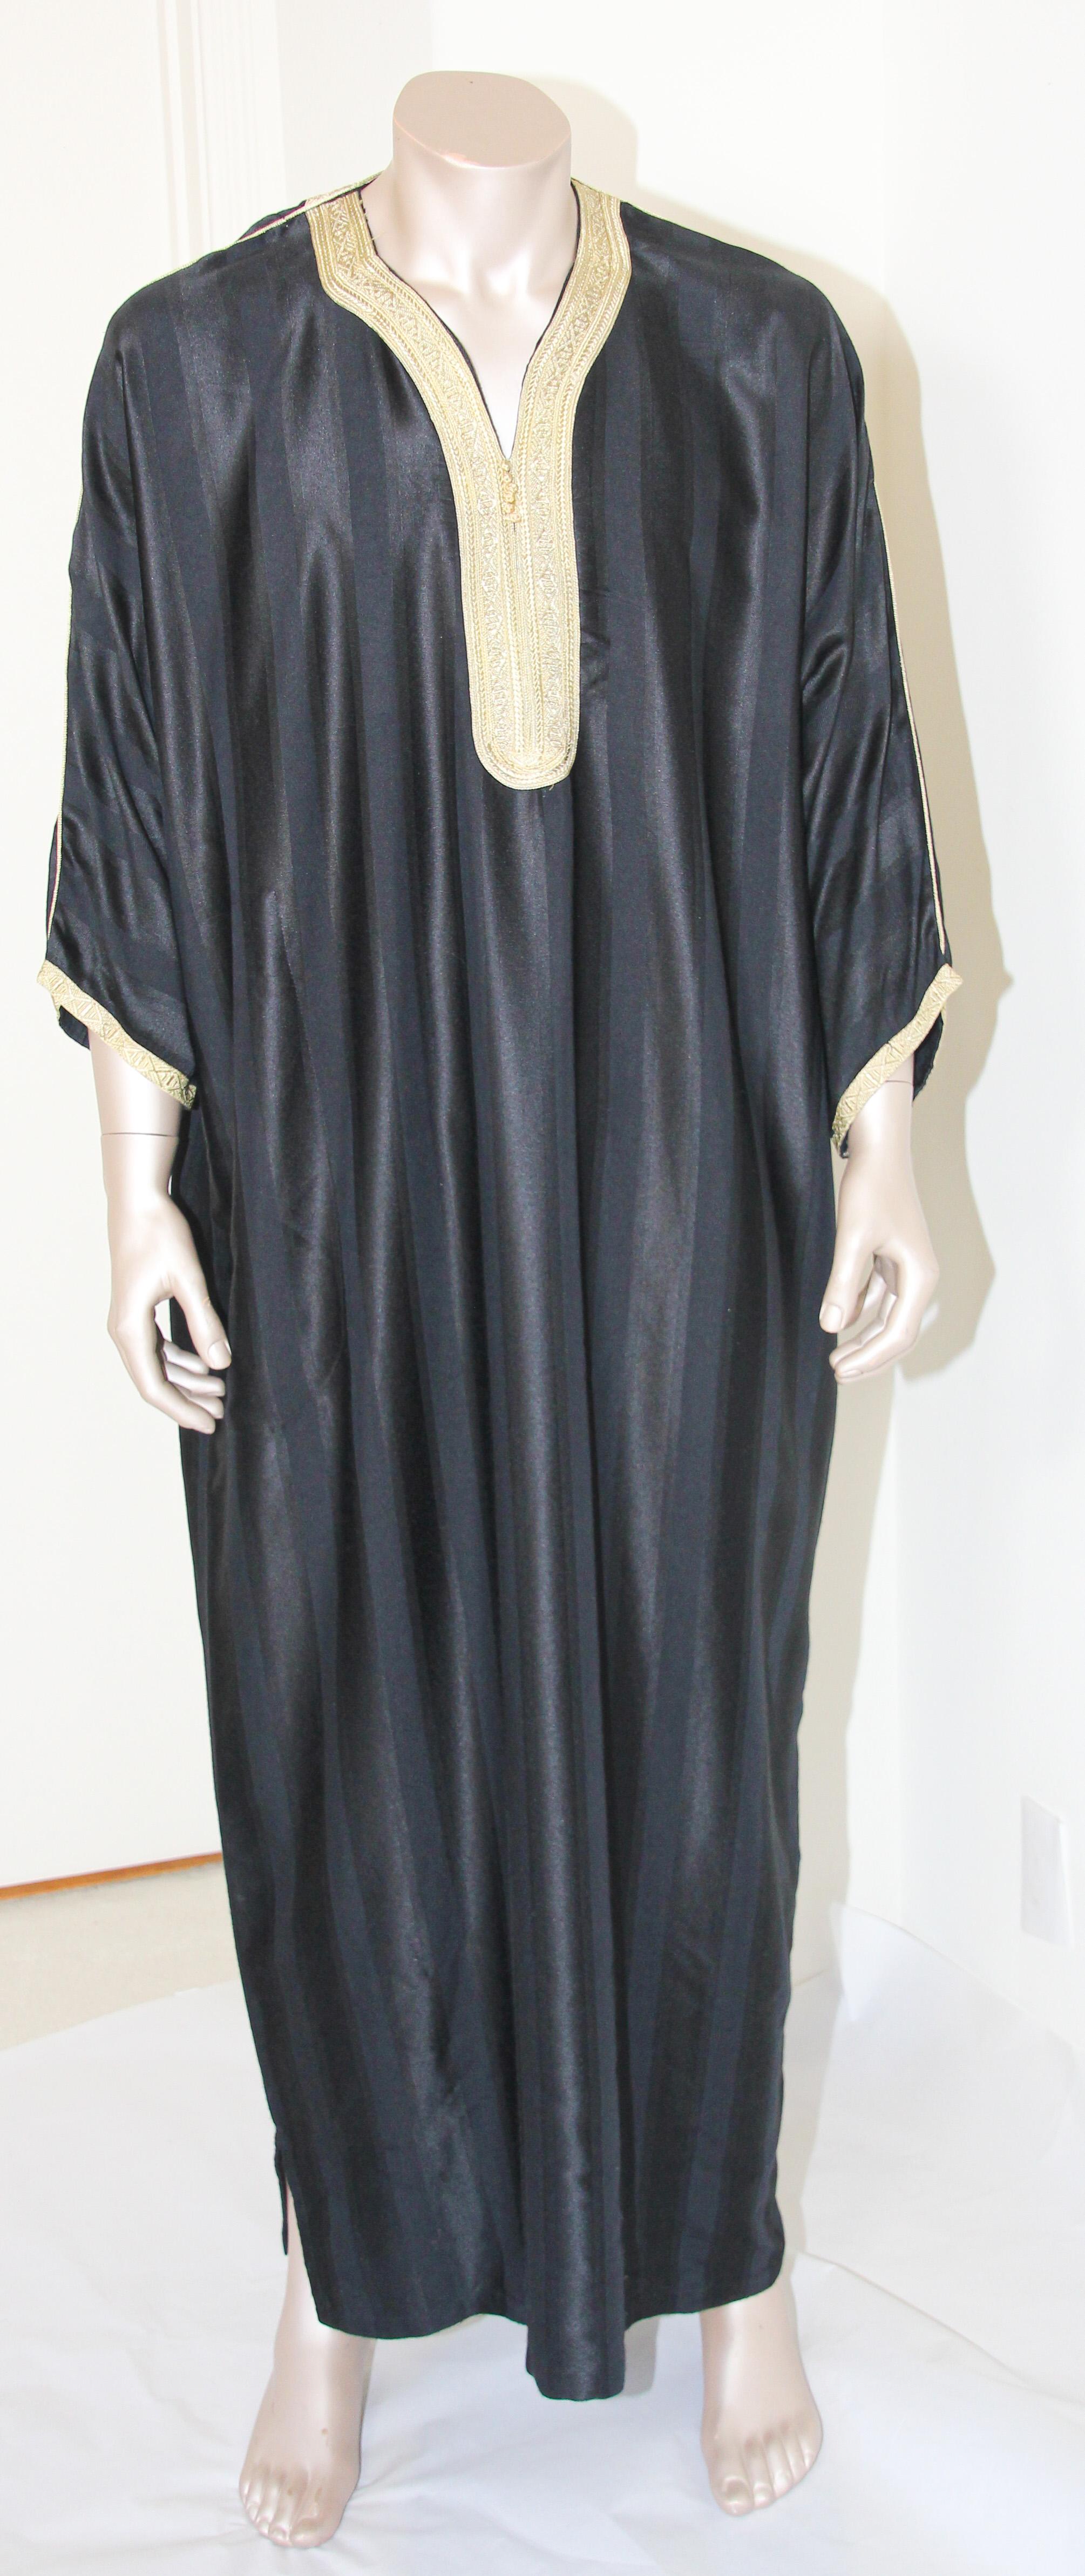 Moroccan gentleman vintage black caftan embellished with gold trim.
In Morocco, fashion preserves its traditional style inherited from great civilizations that found their way to Northwest Africa, such as the Ottomans and the Moors.
Moroccan